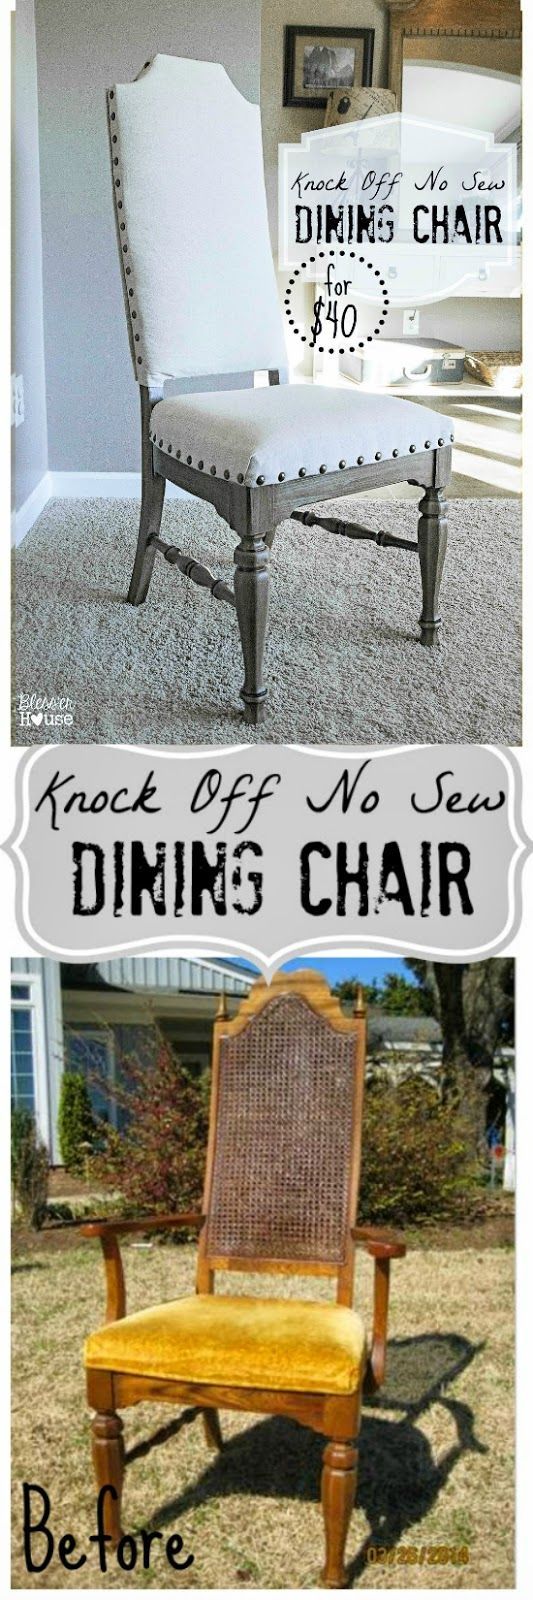 Knock Off No Sew Dining Chair Makeover | Bless’er House – Way easier than traditional upholstery and only cost $40 to do! Looks a